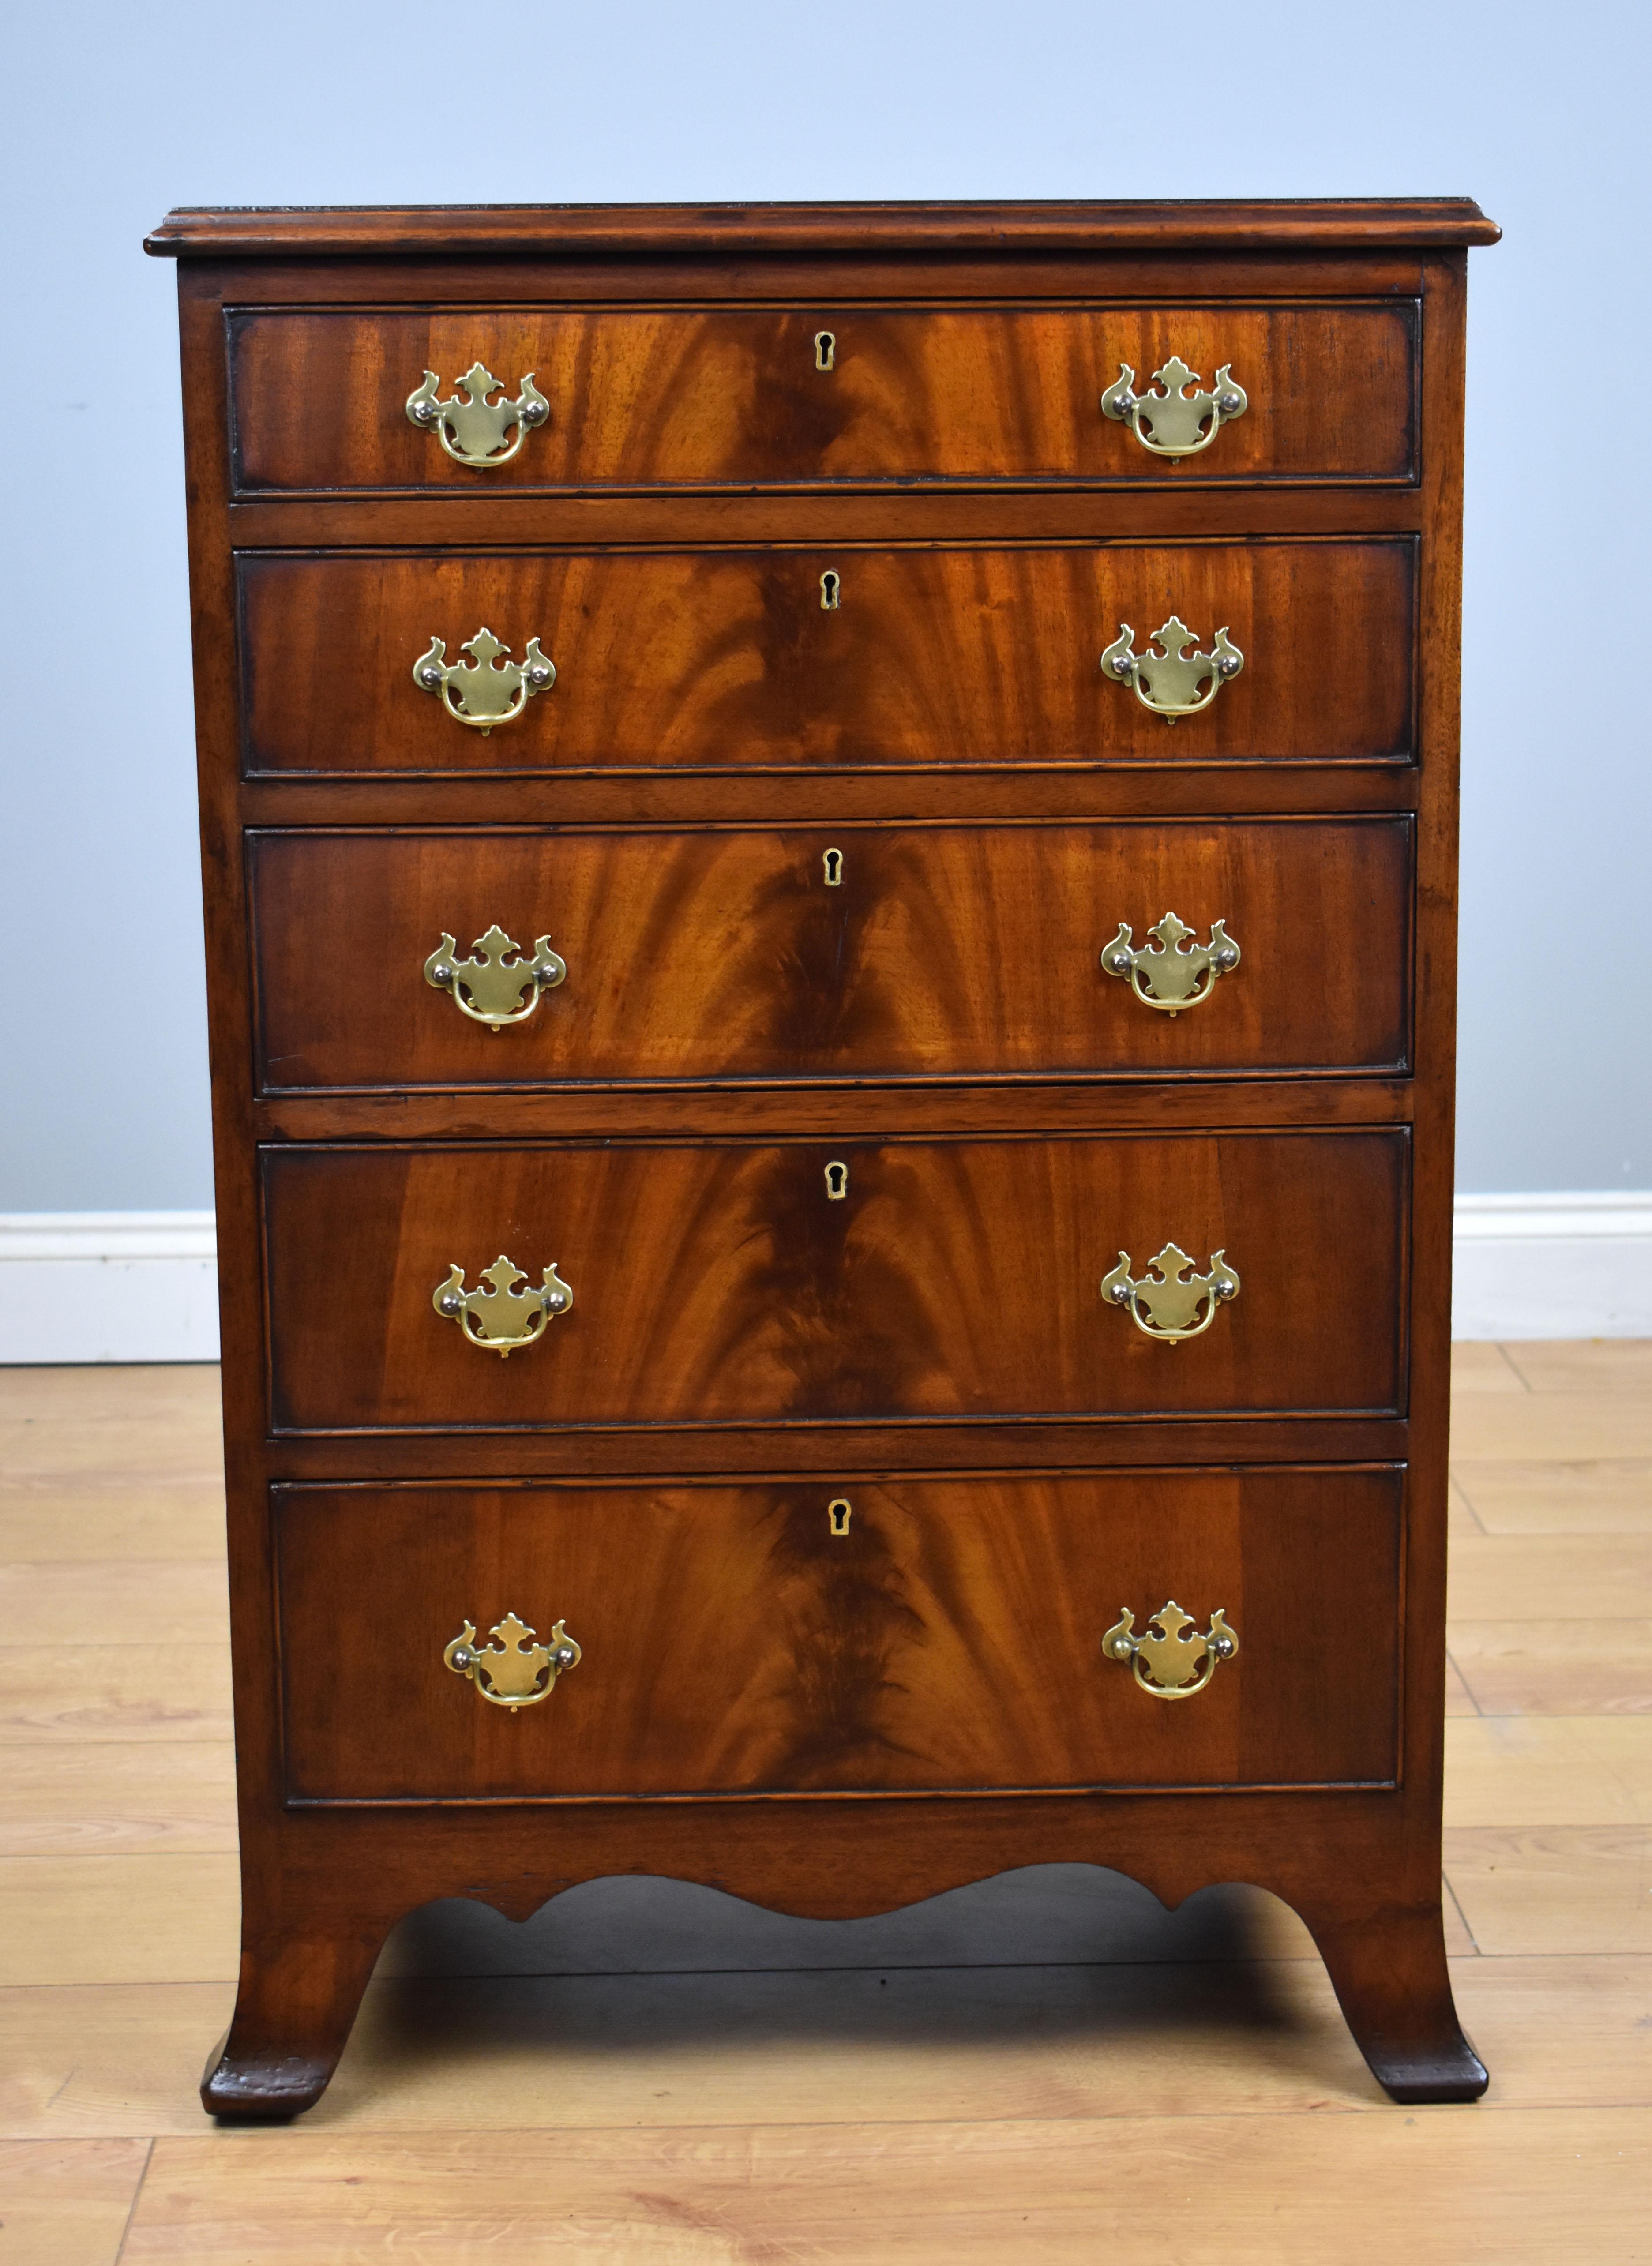 For sale is a good quality antique flame mahogany chest of drawers, having an arrangement of five graduated drawers, each with their original brass handles. The chest is raised on splayed feet and is in very good condition for its age. 

Measures: